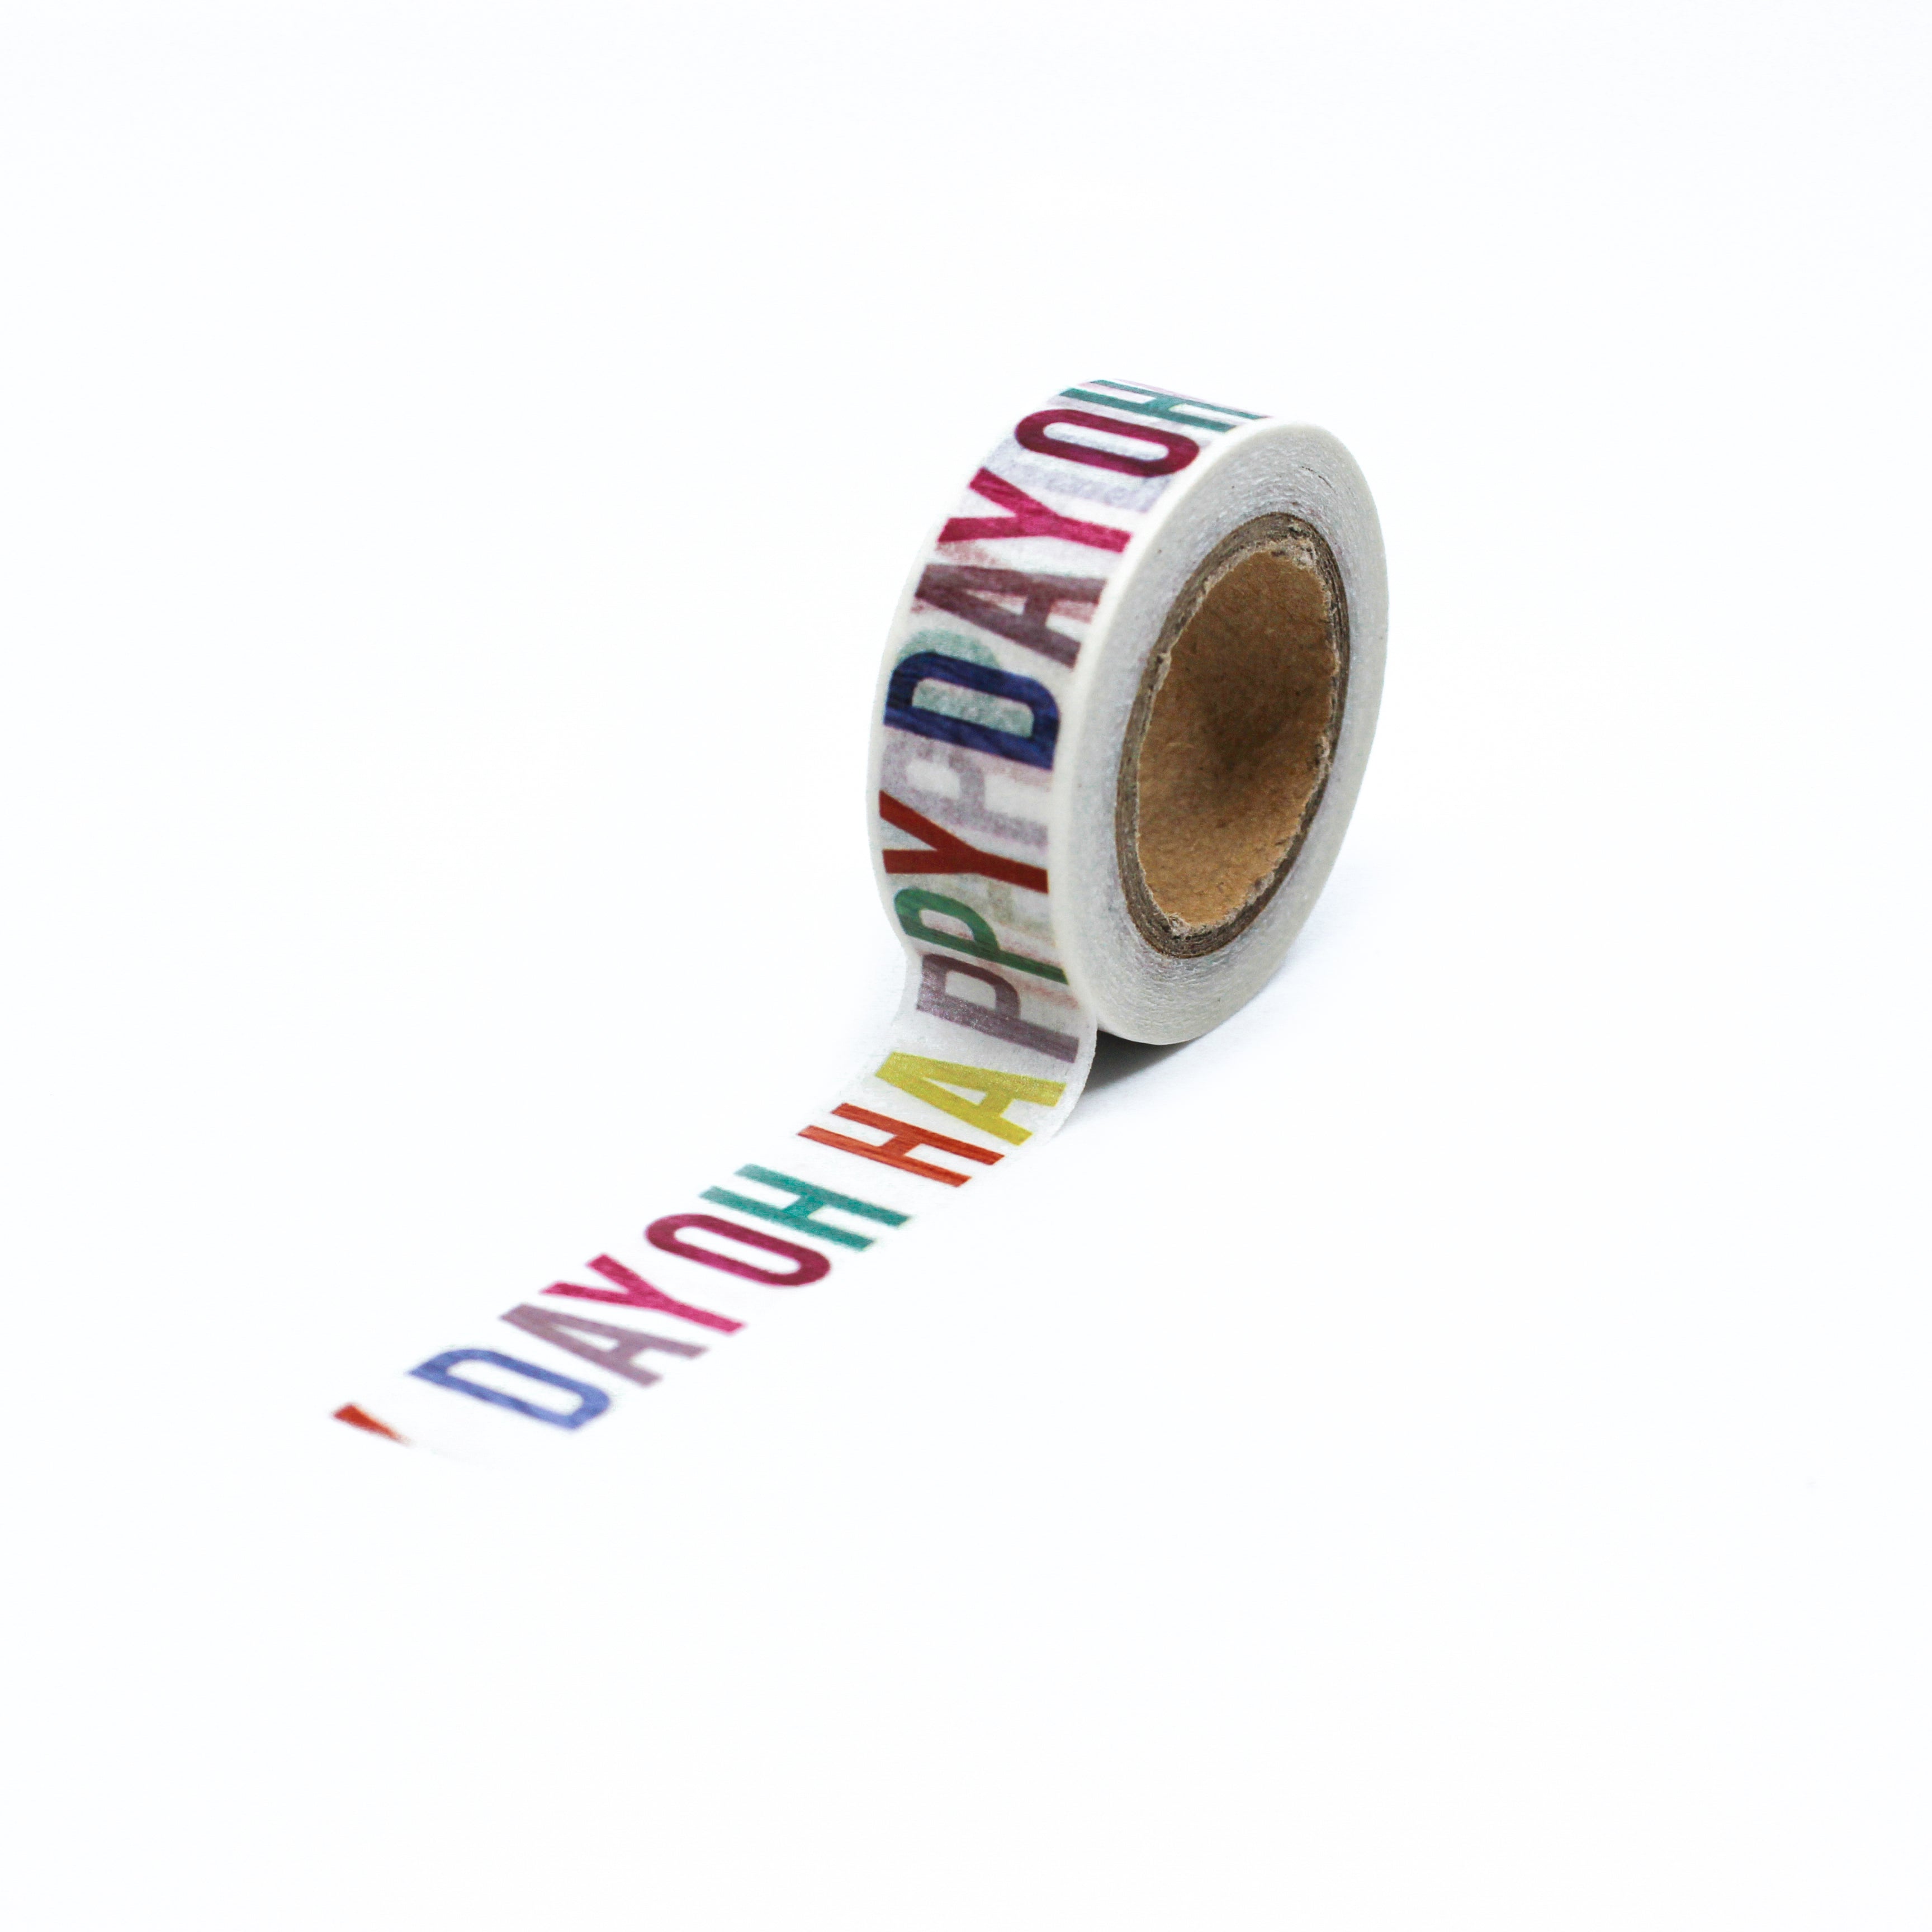 This is a full pattern repeat view of fun Oh! Happy Day text washi tape from BBB Supplies Craft Shop